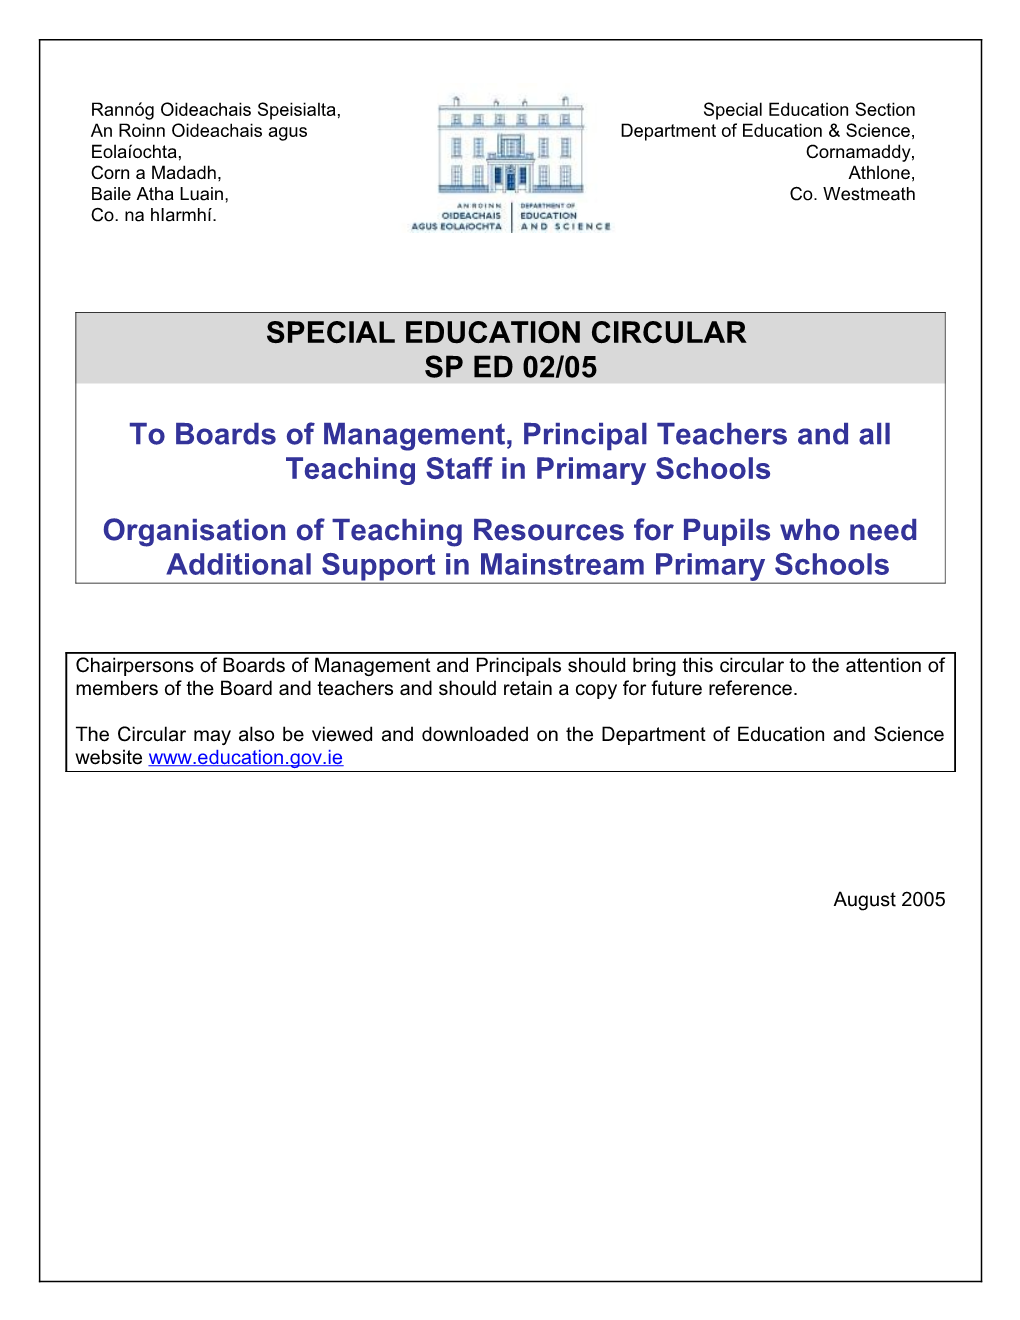 Circular SP ED 02/05 - Organisation of Teaching Resources for Pupils Who Need Additional